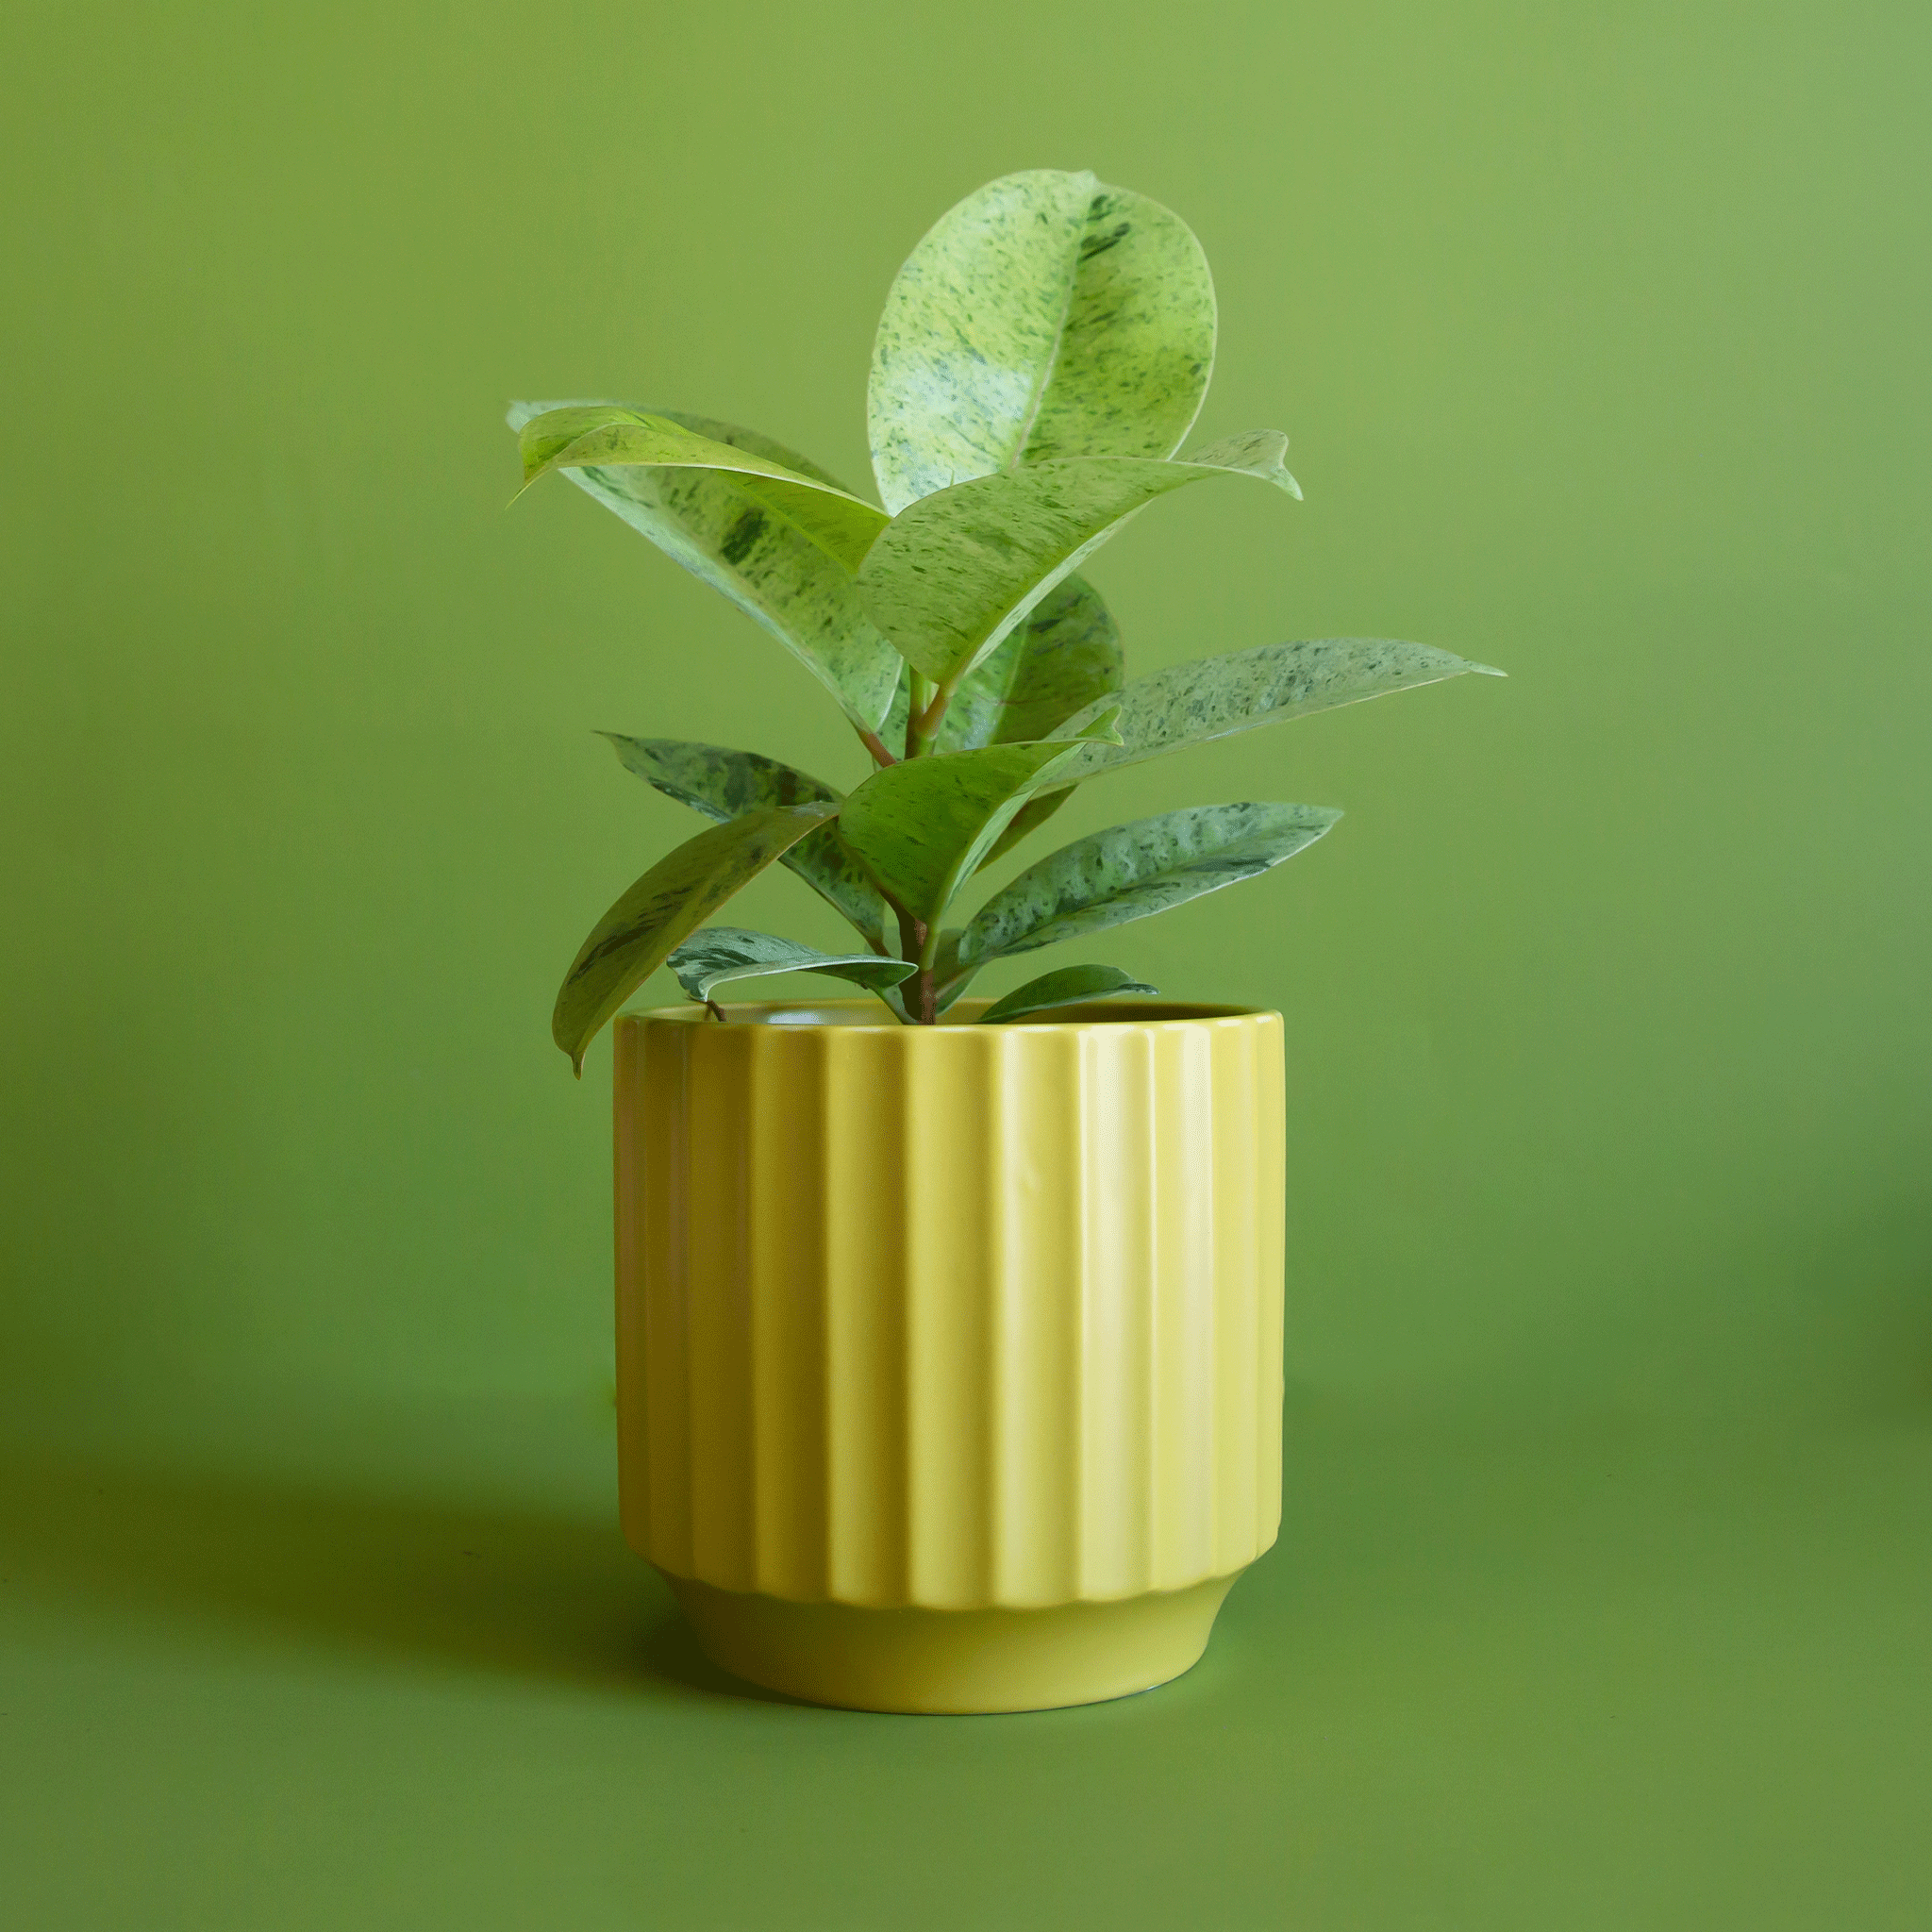  On a green background is a ribbed chartreuse planter filled with a green house plant inside.